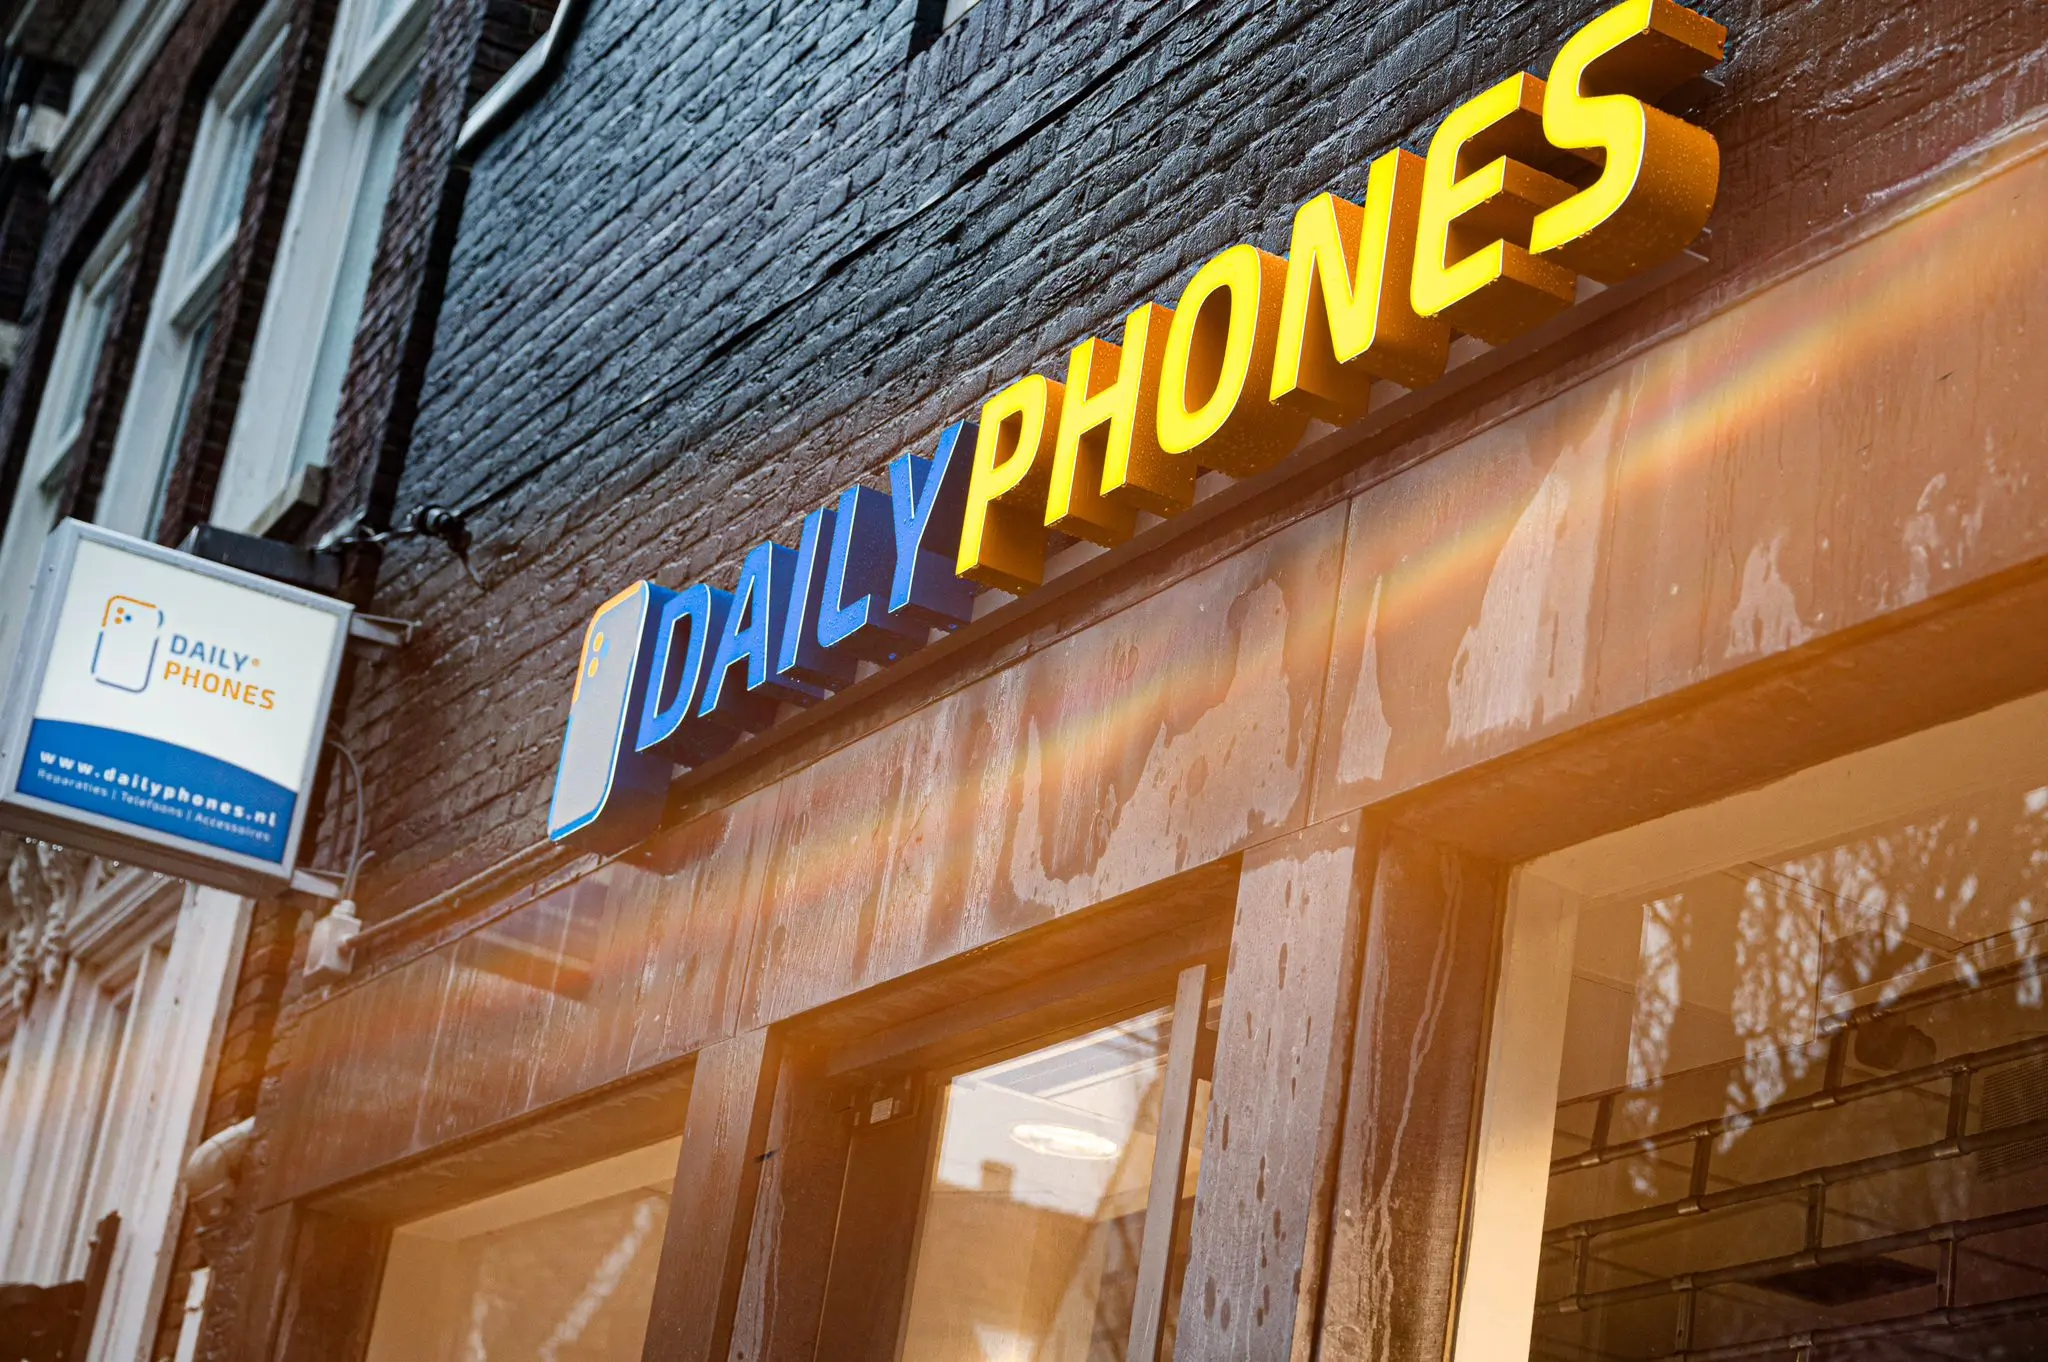 Welcome to Daily Phones Harlingen: Your Trusted Partner for Apple Repairs